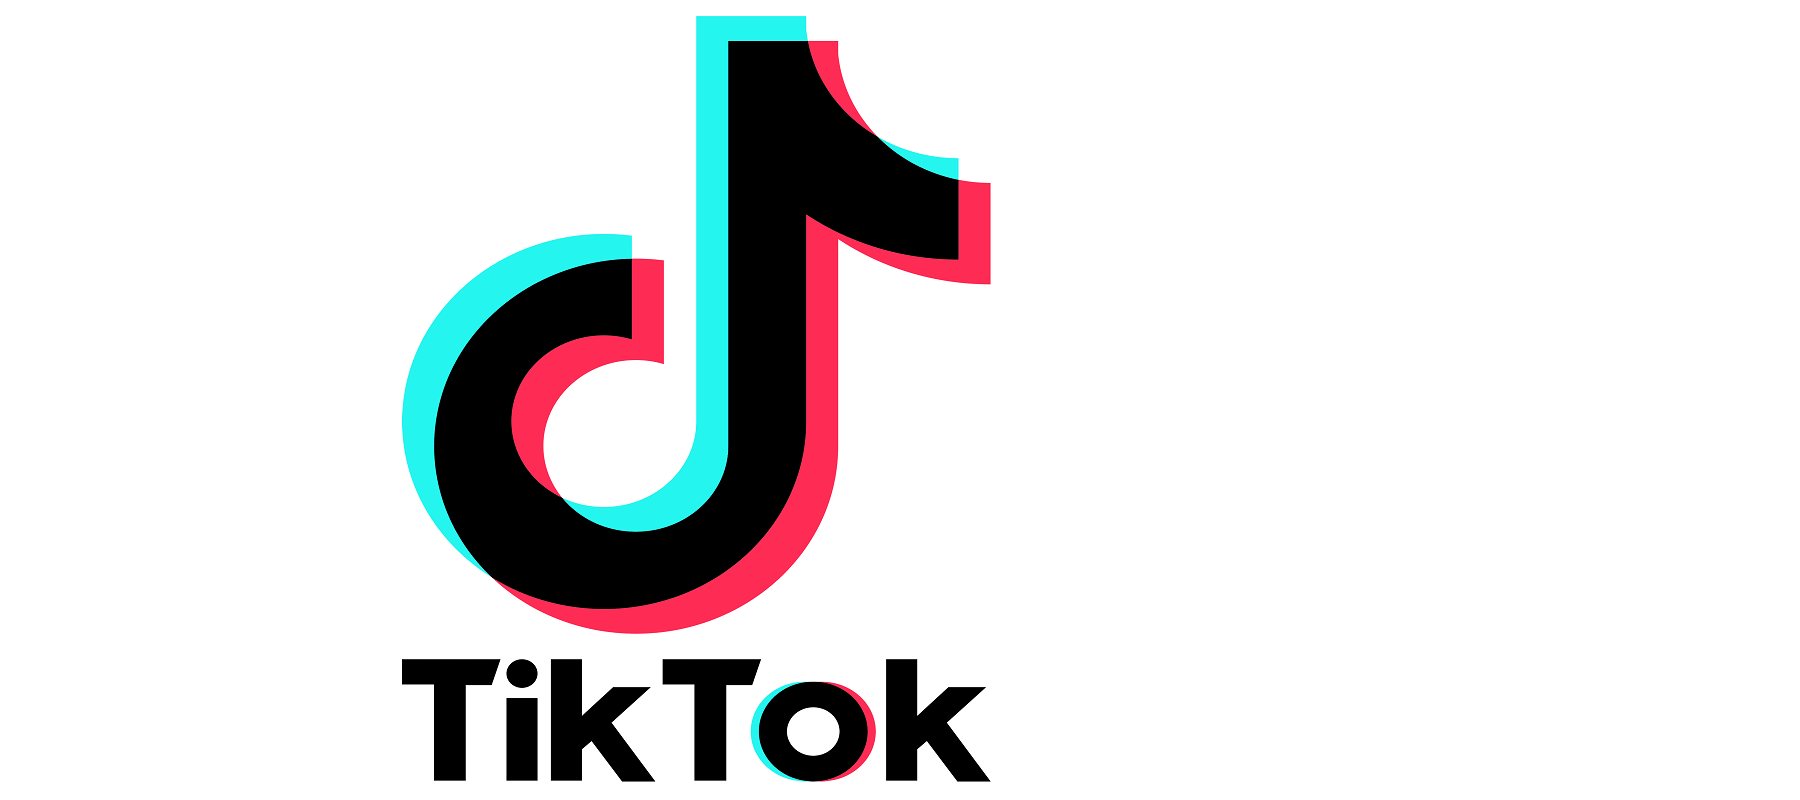 TikTok affirms commitment to safety in parliament appearance